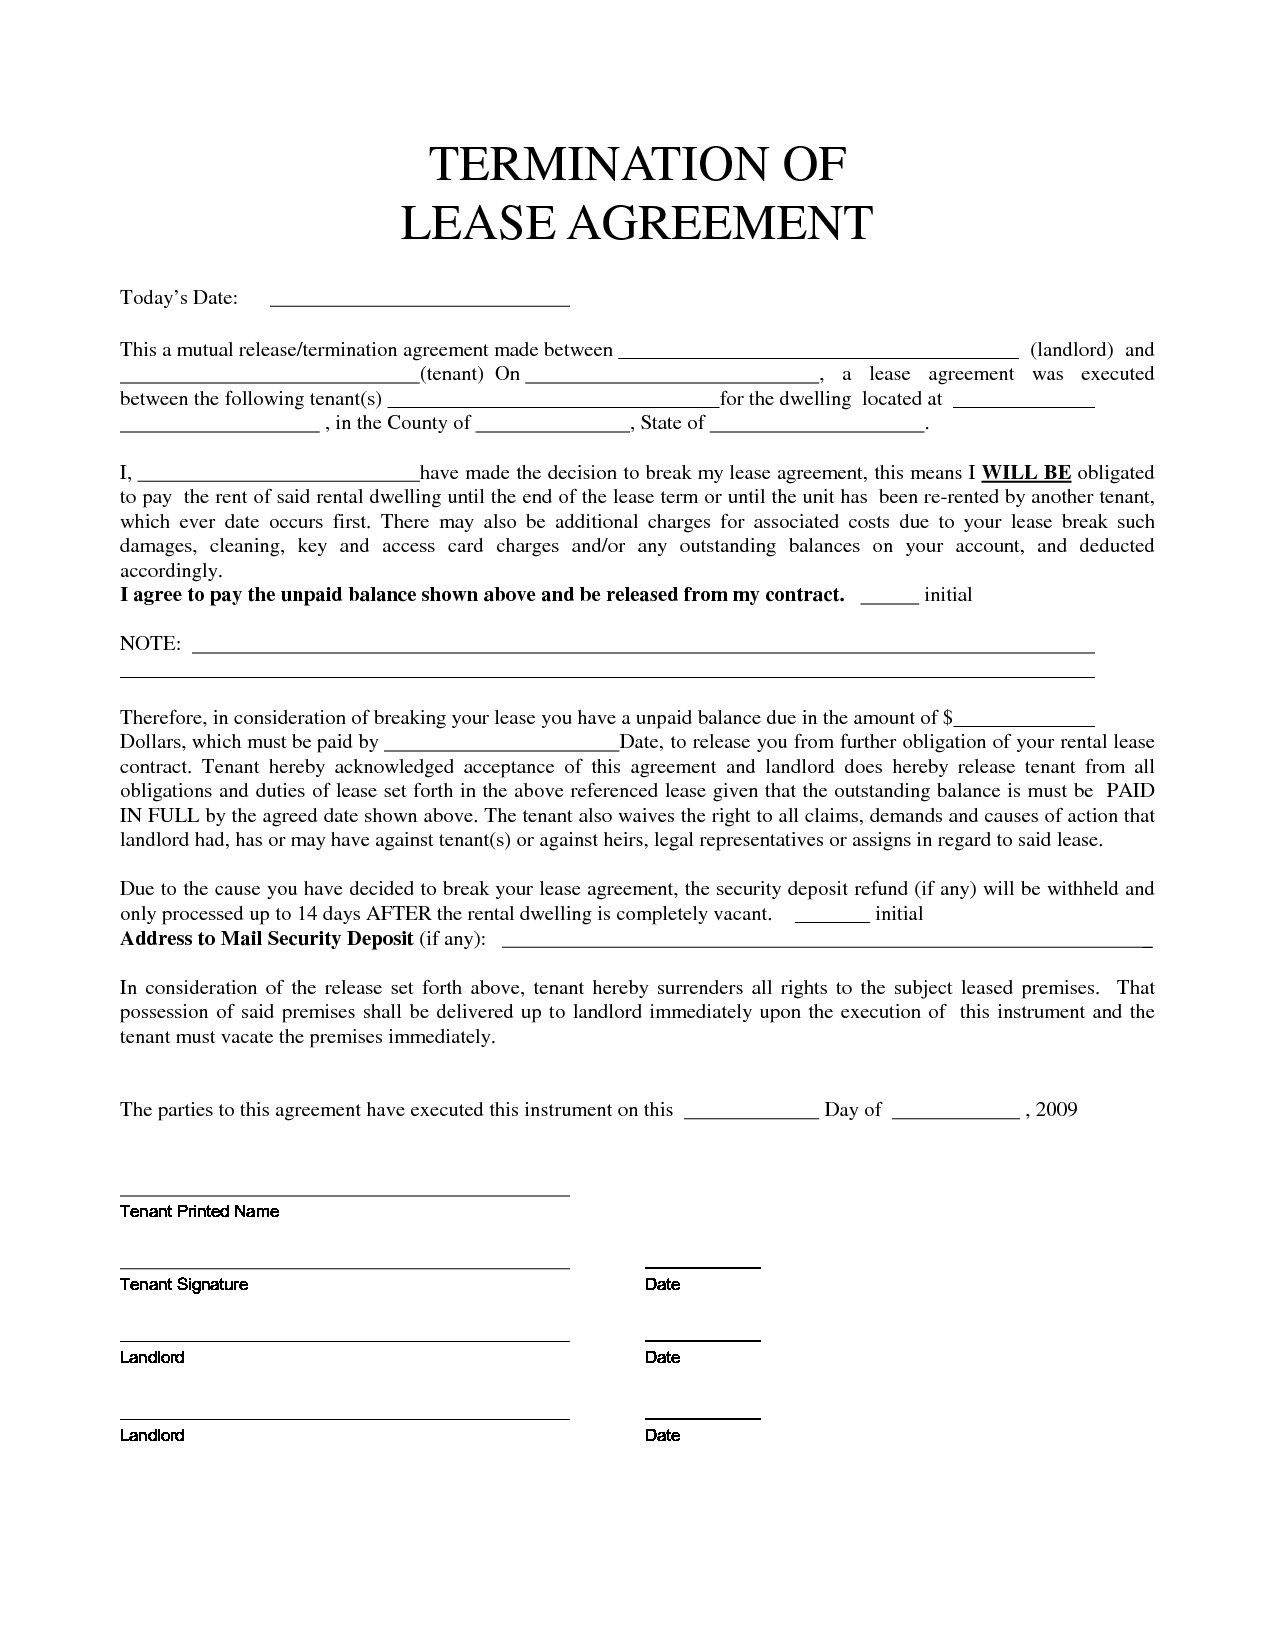 Termination Of Lease Agreement Form - Free Printable Documents